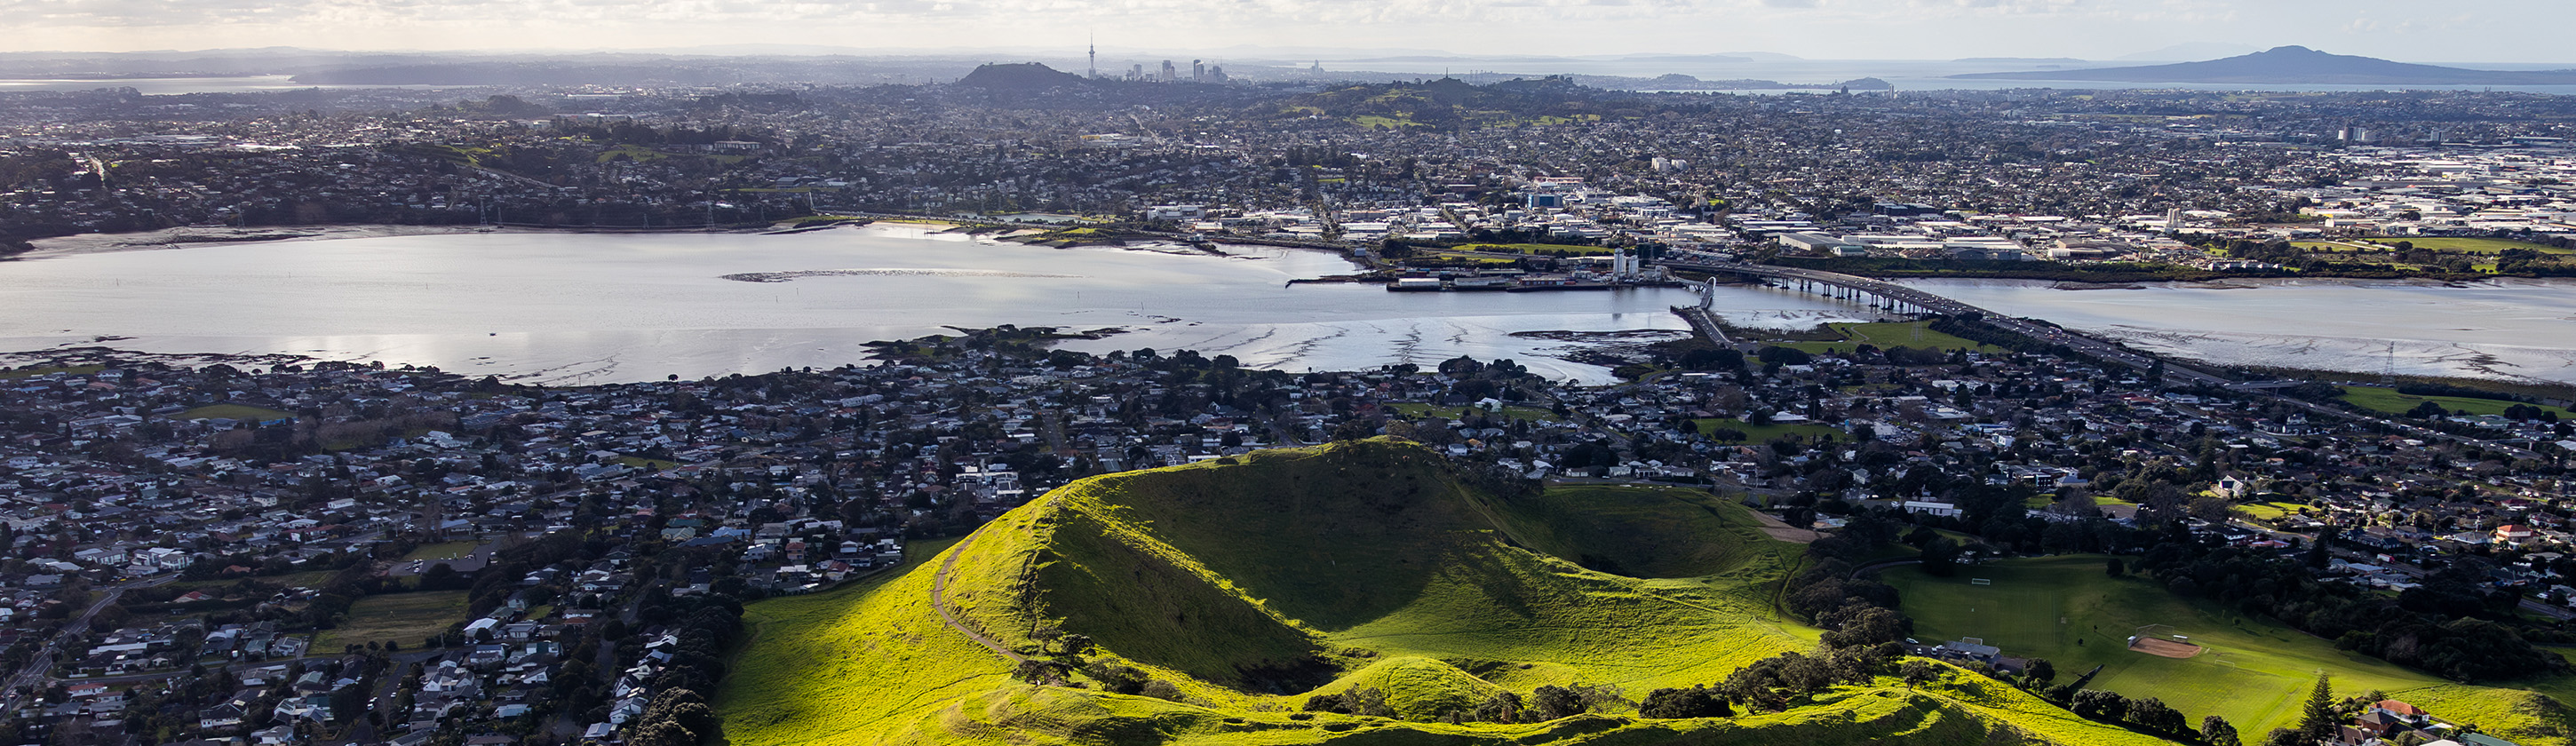 Aerial view of Māngere Mountain in South Auckland. Vibrant green grass and some trees cover the crater - an ancient and prominent cultural feature. The Māngere Inlet, part of the Manukau Harbour, Rangitoto Island and Mangere Bridge are to the north. To the right of the bridge is the historical portage where waka were carried over land between the Tamaki River and the Manukau Harbour. The sprawling urban landscape of Auckland city with its distinctive skyline and the Sky Tower is in the distance.